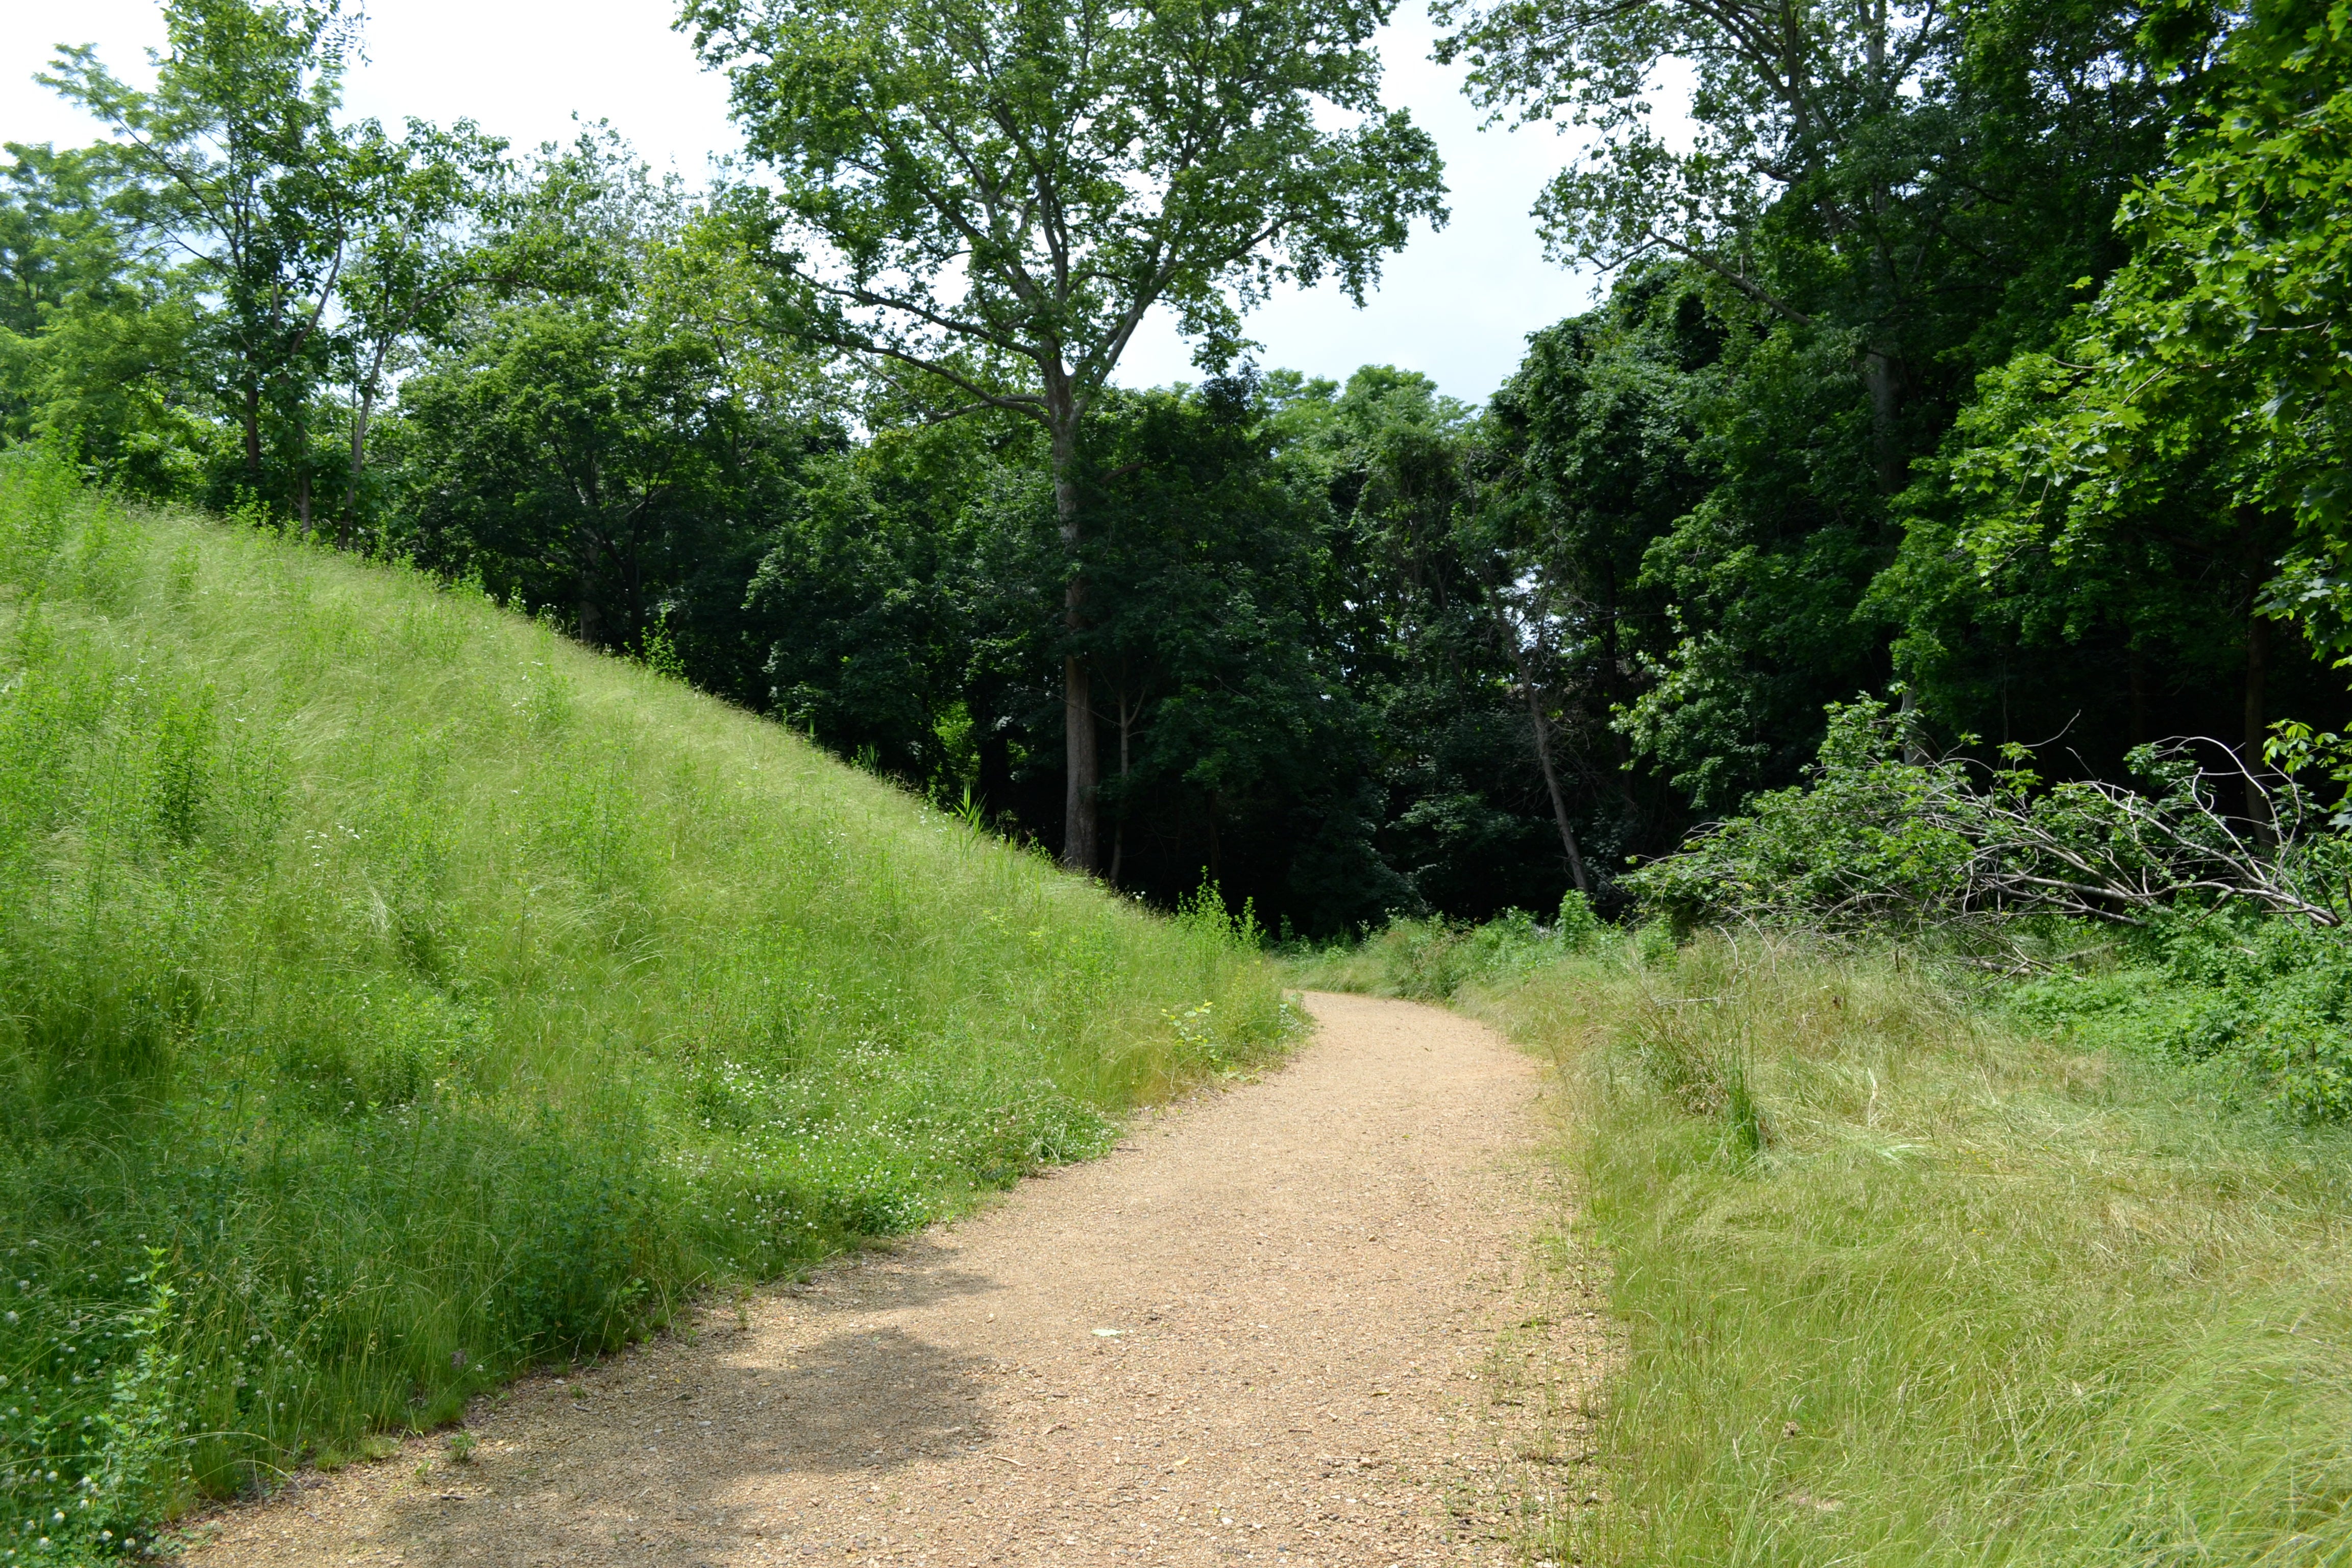 Some of the landscape features the nature path wraps around are man made, like this small mound